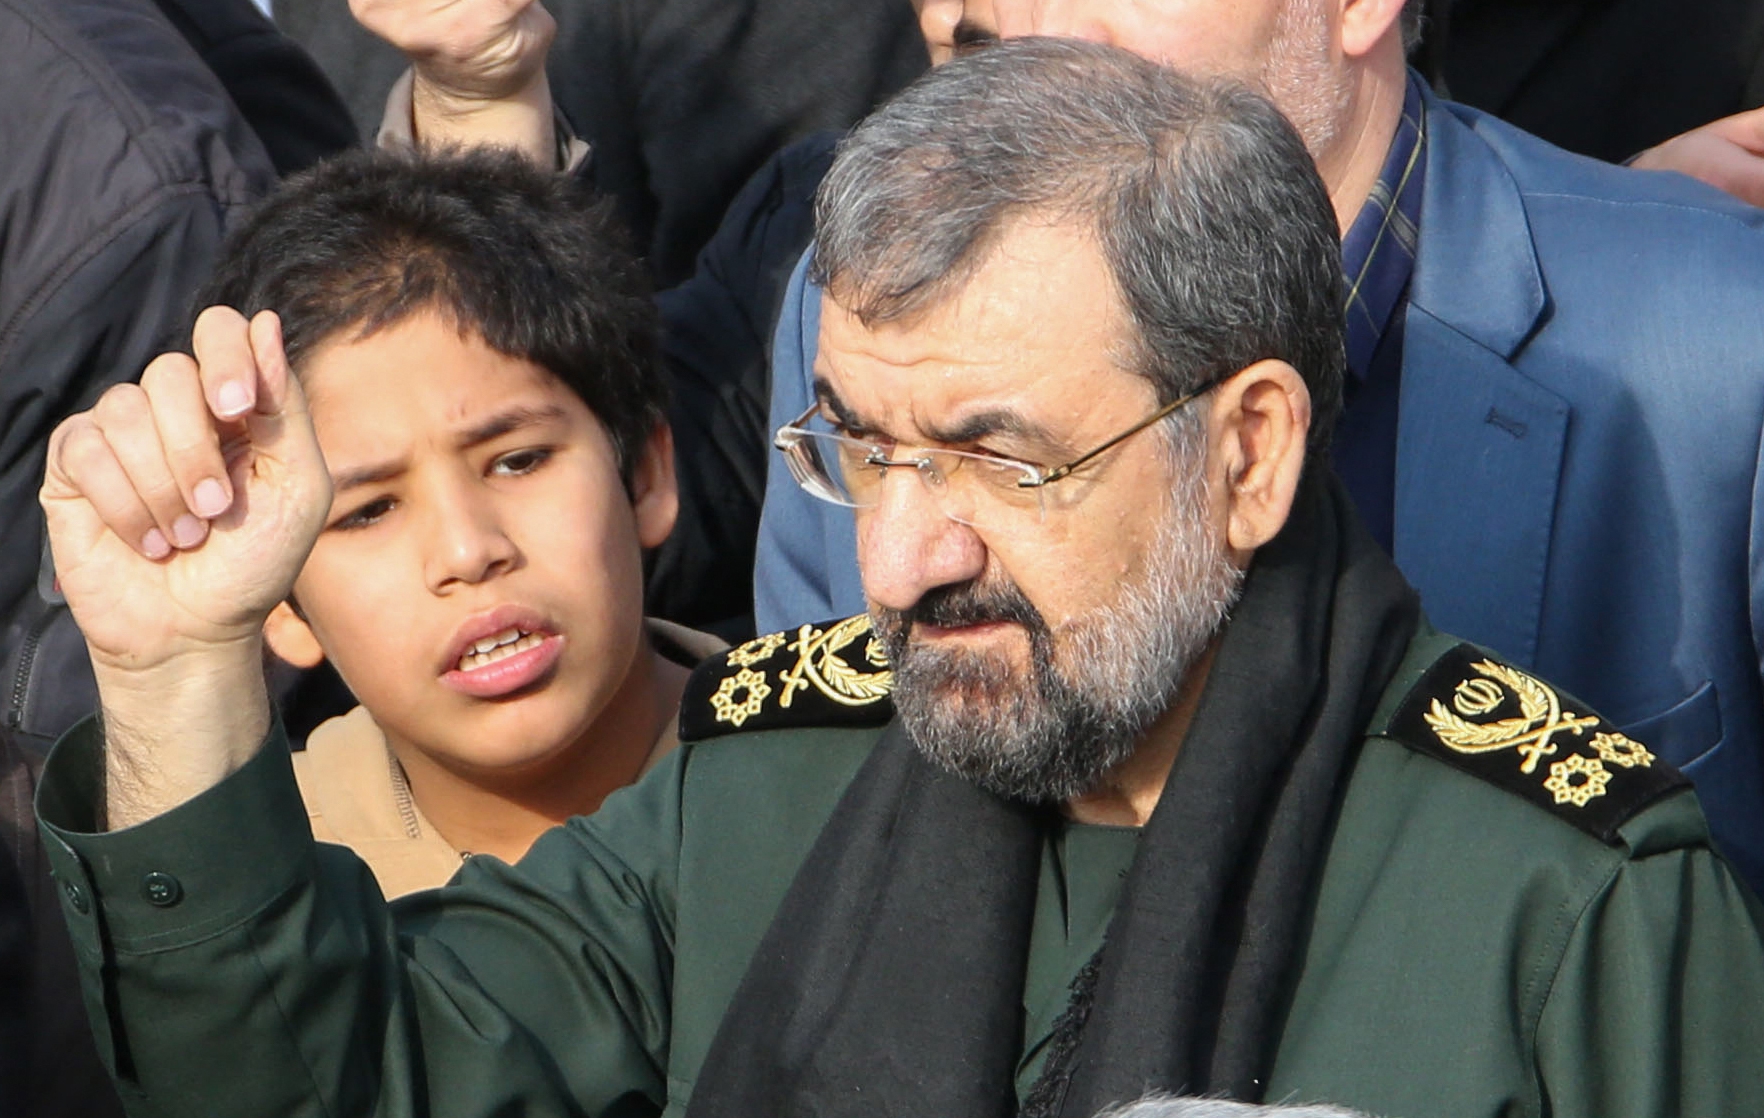 Mohsen Rezaei was a leader in the Iranian Revolutionary Guard Corps for 16 years.